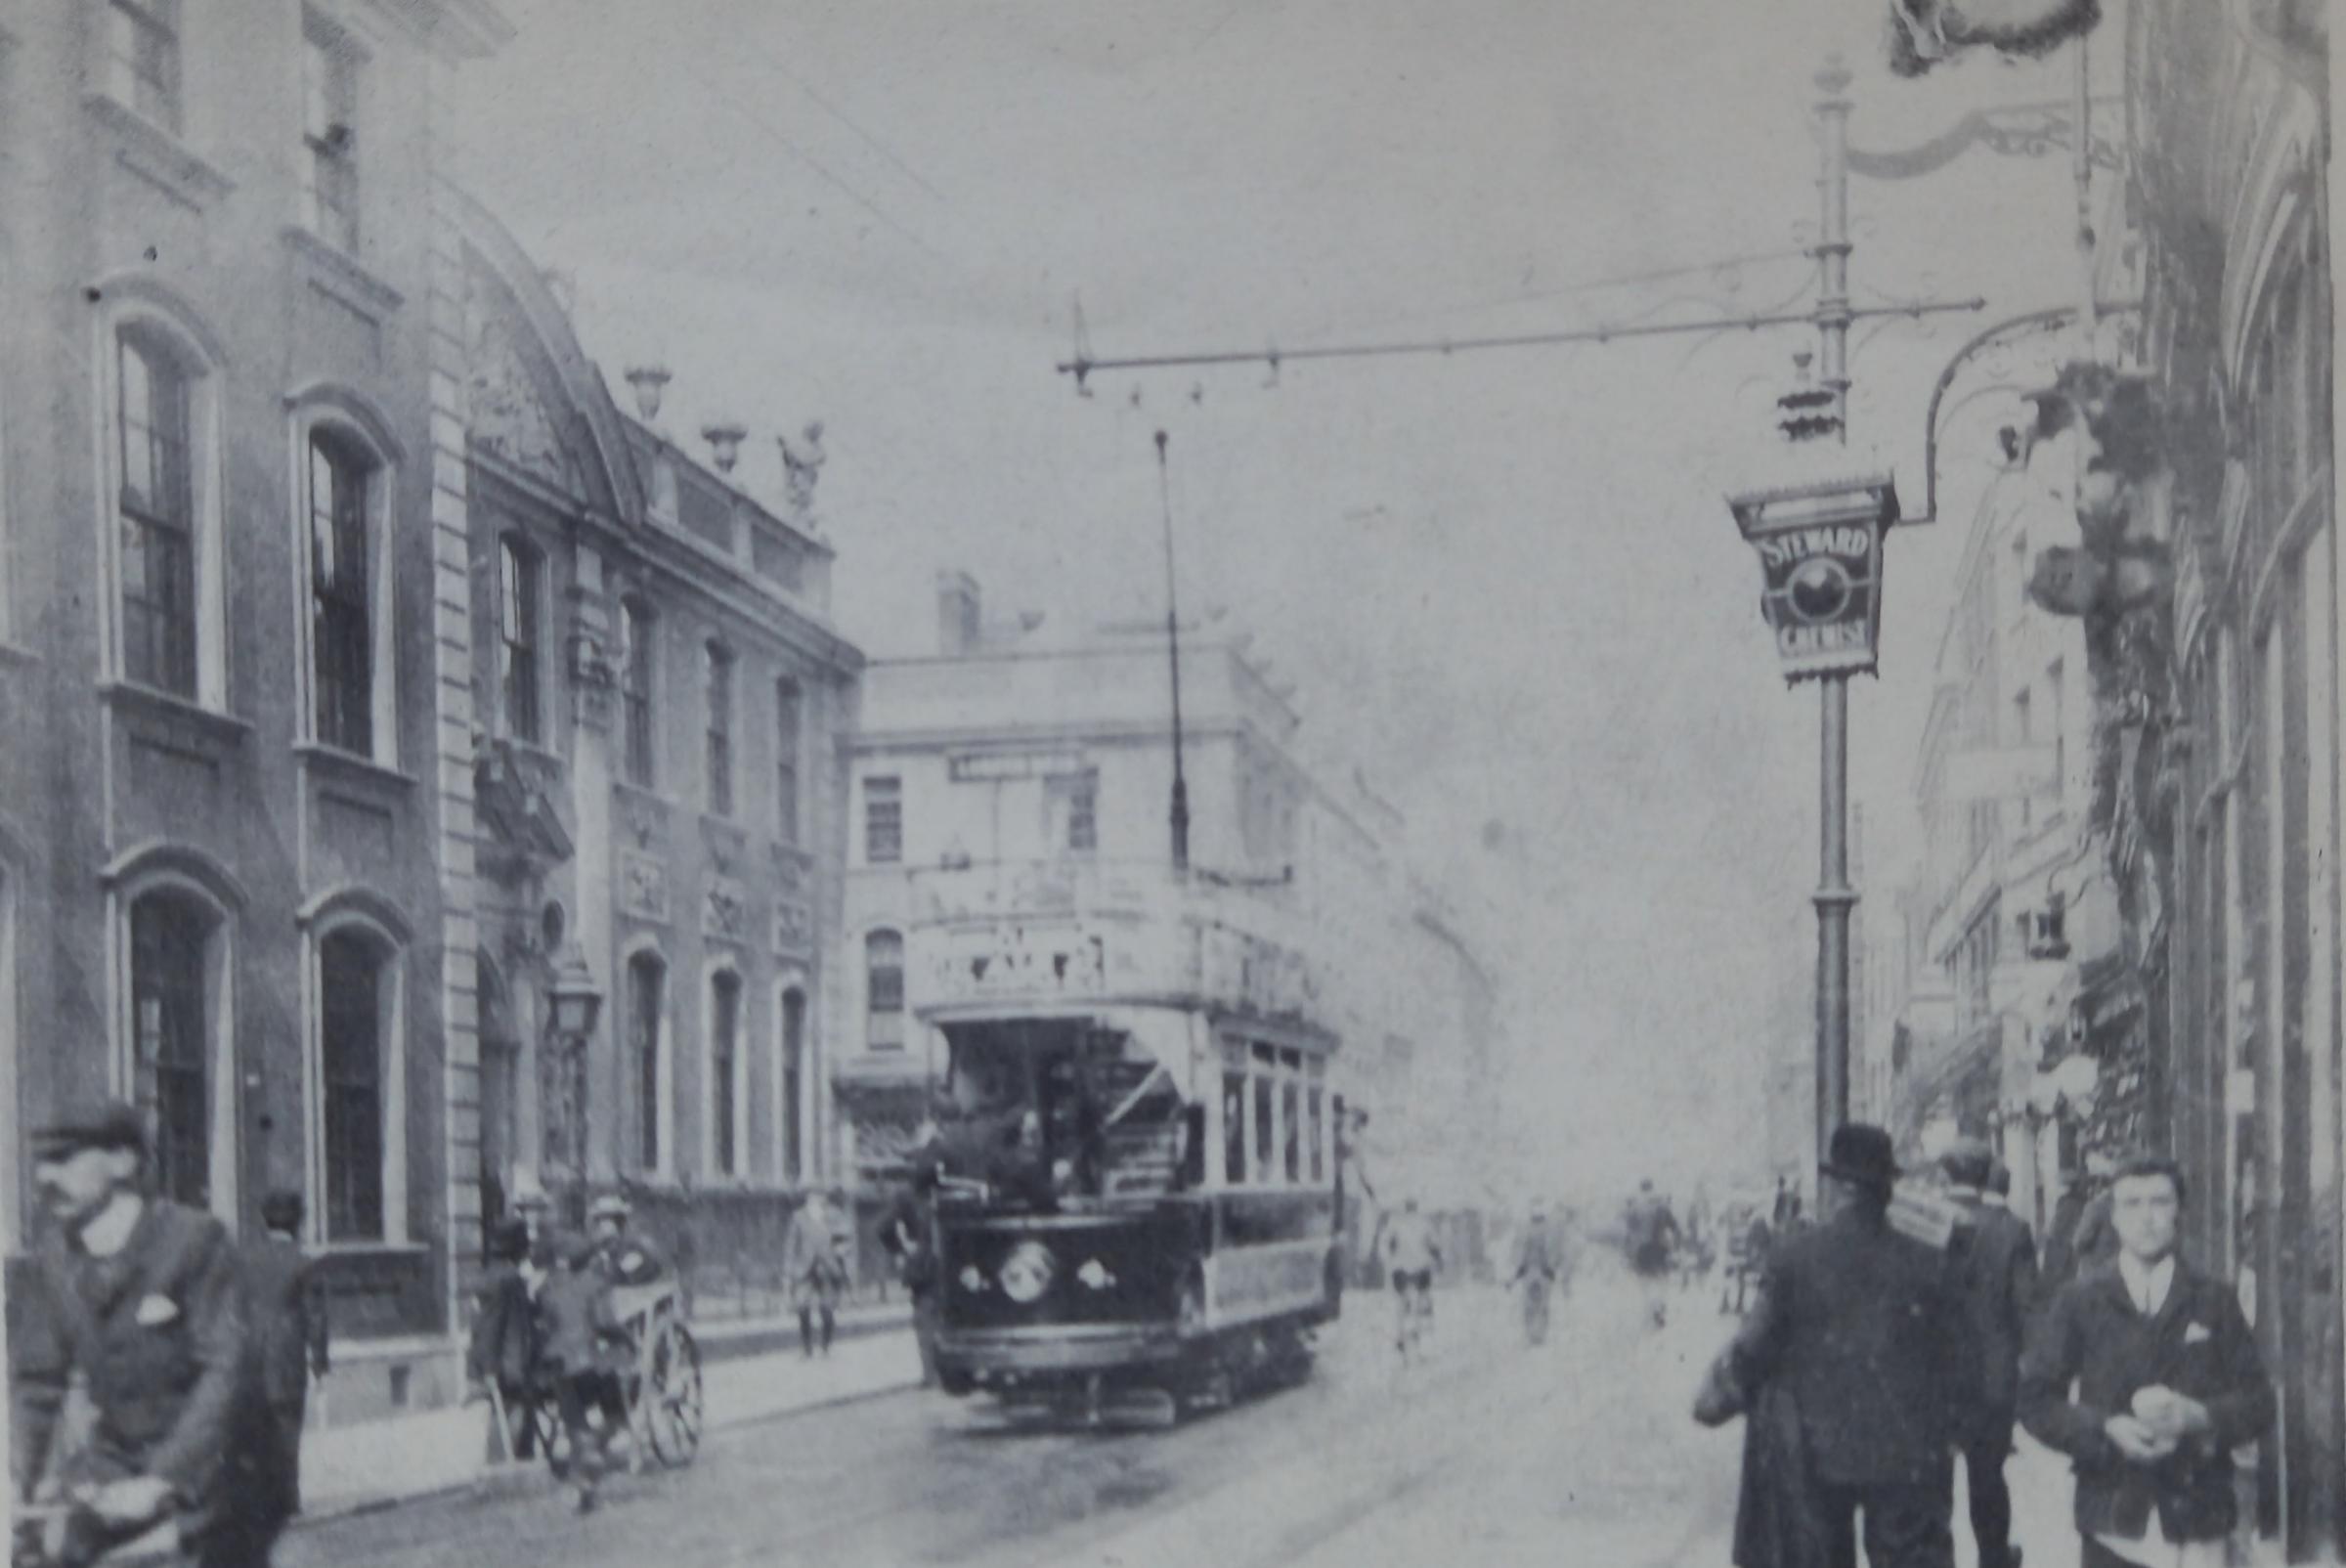 The Guildhall and High Street in 1904, when electric trams had just arrived. Inset, Worcester Guildhall, where election results have traditionally been announced, decked in bunting and flowers in 1902 to celebrate the end of the Boer War